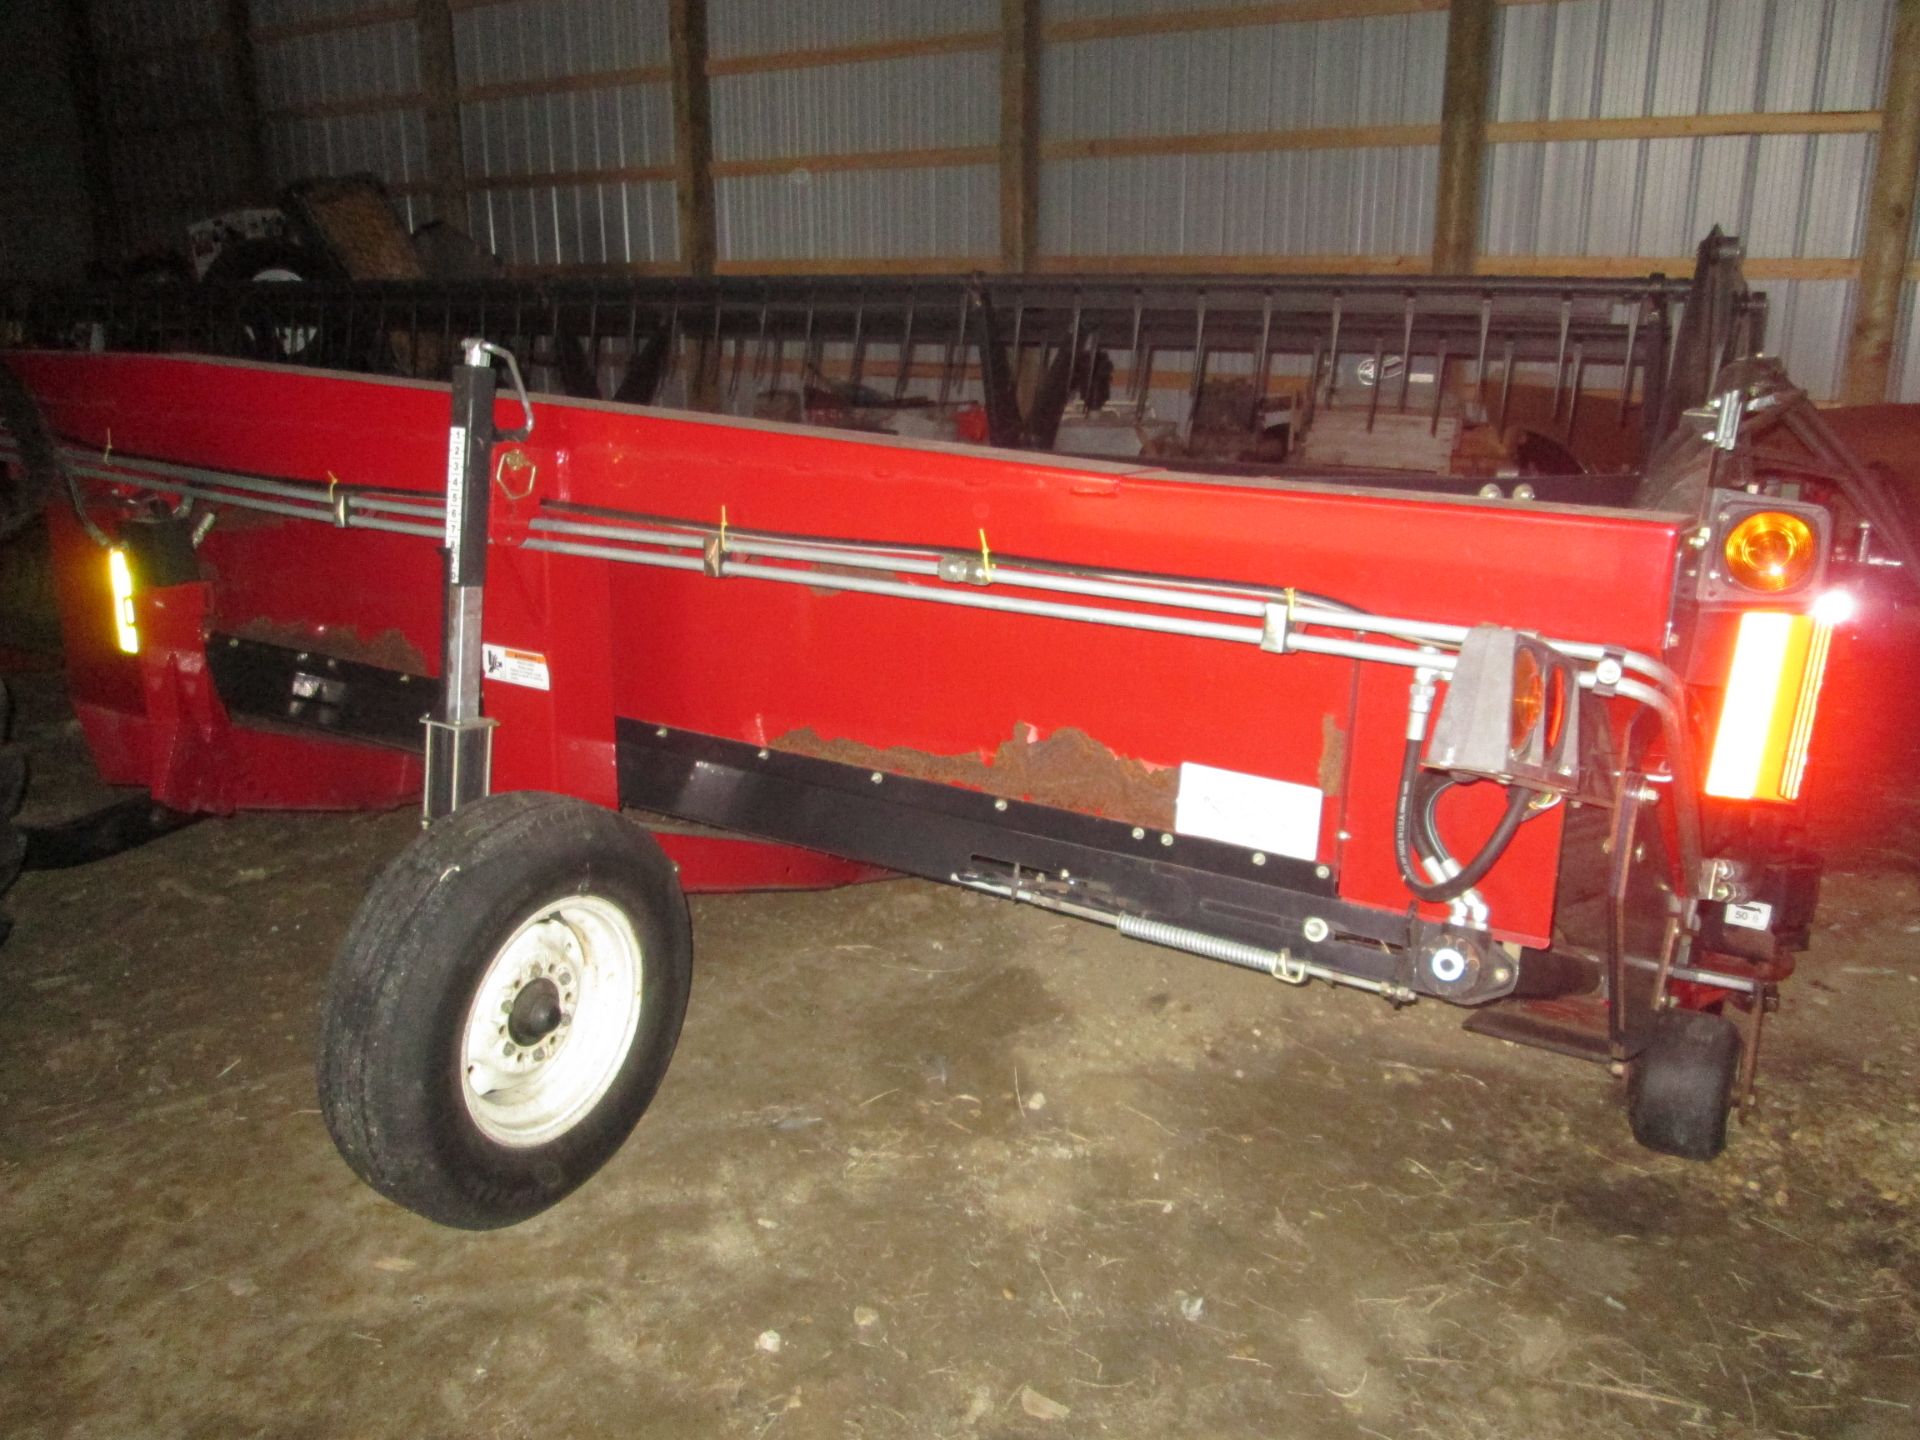 Case WDX 1202 S swather (2005), c/w 30' DHX 302 header (2007), showing 795 eng hr, dbl knife - Image 15 of 32